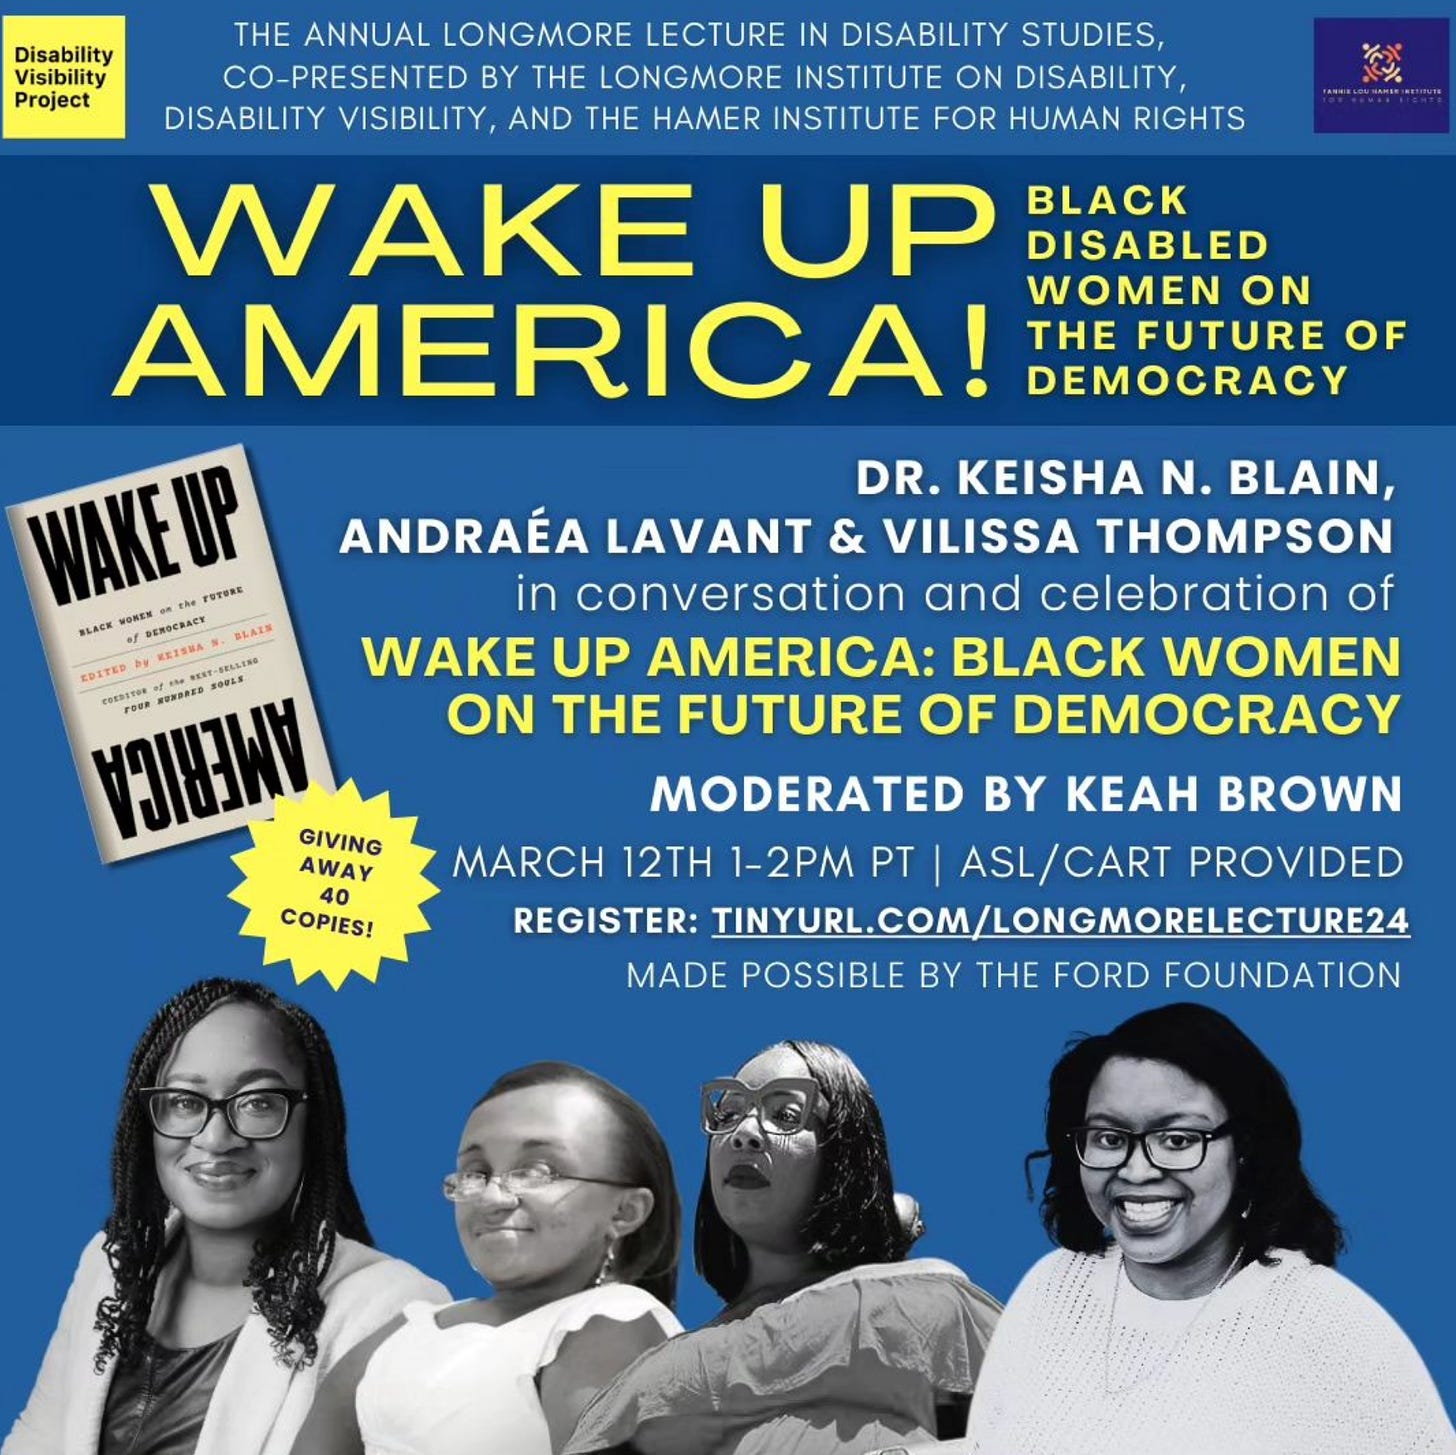 Shades of blue make up the background. The text reads "Wake Up America! Black Disabled Women on the Future of Democracy." To the left is an image of the book Wake Up America, and a graphic reads "Giving Away 40 Copies!" Along the bottom are black and white images of our participants. Dr. Keisha N. Blain smiles at the camera. She wears glasses and a cardigan over her shirt. Her hair is in braids. Vilissa Thompson a Black woman with her hair parted and hanging down straight. She smiles, facing the camera in her wheelchair and wearing a white shirt. Andraéa Lavant is an African-American woman wearing cat-eye glasses. She wears a flowy shirt and lipstick. Her hair is straight and shoulder length. She’s a power wheelchair user. Keah Brown smiles to camera. She is a black woman with short black hair wearing glasses and a sweater. Her hair falls in soft curls to her shoulders and is wearing a necklace.